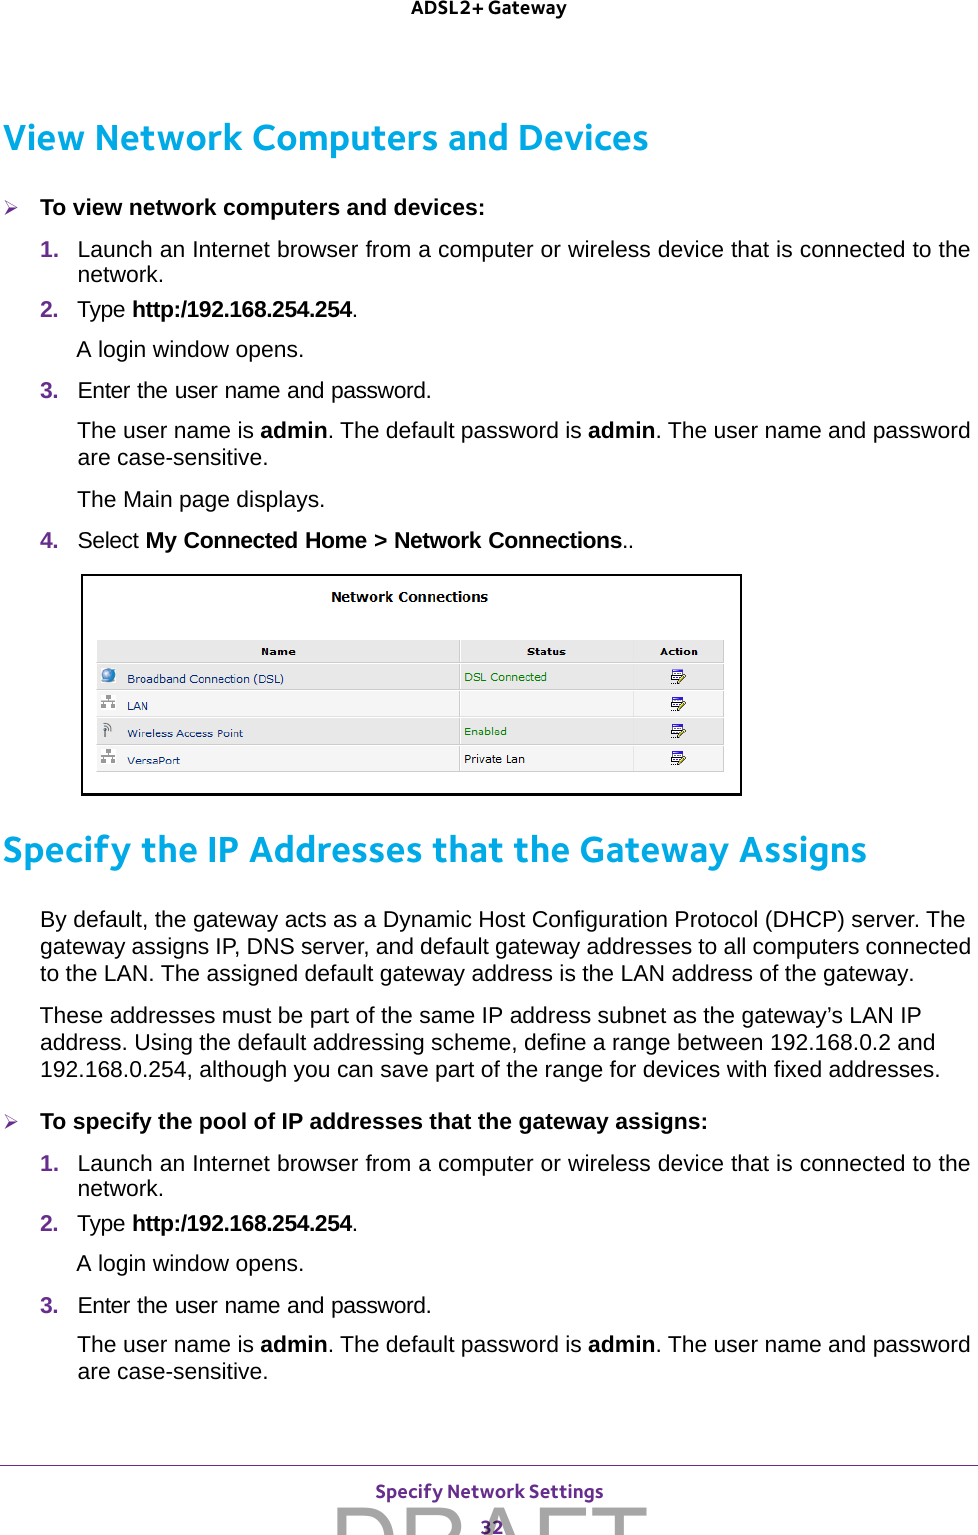 Specify Network Settings 32ADSL2+ Gateway View Network Computers and DevicesTo view network computers and devices:1.  Launch an Internet browser from a computer or wireless device that is connected to the network.2.  Type http:/192.168.254.254.A login window opens.3.  Enter the user name and password.The user name is admin. The default password is admin. The user name and password are case-sensitive.The Main page displays.4.  Select My Connected Home &gt; Network Connections..Specify the IP Addresses that the Gateway AssignsBy default, the gateway acts as a Dynamic Host Configuration Protocol (DHCP) server. The gateway assigns IP, DNS server, and default gateway addresses to all computers connected to the LAN. The assigned default gateway address is the LAN address of the gateway. These addresses must be part of the same IP address subnet as the gateway’s LAN IP address. Using the default addressing scheme, define a range between 192.168.0.2 and 192.168.0.254, although you can save part of the range for devices with fixed addresses.To specify the pool of IP addresses that the gateway assigns:1.  Launch an Internet browser from a computer or wireless device that is connected to the network.2.  Type http:/192.168.254.254.A login window opens.3.  Enter the user name and password.The user name is admin. The default password is admin. The user name and password are case-sensitive.DRAFT